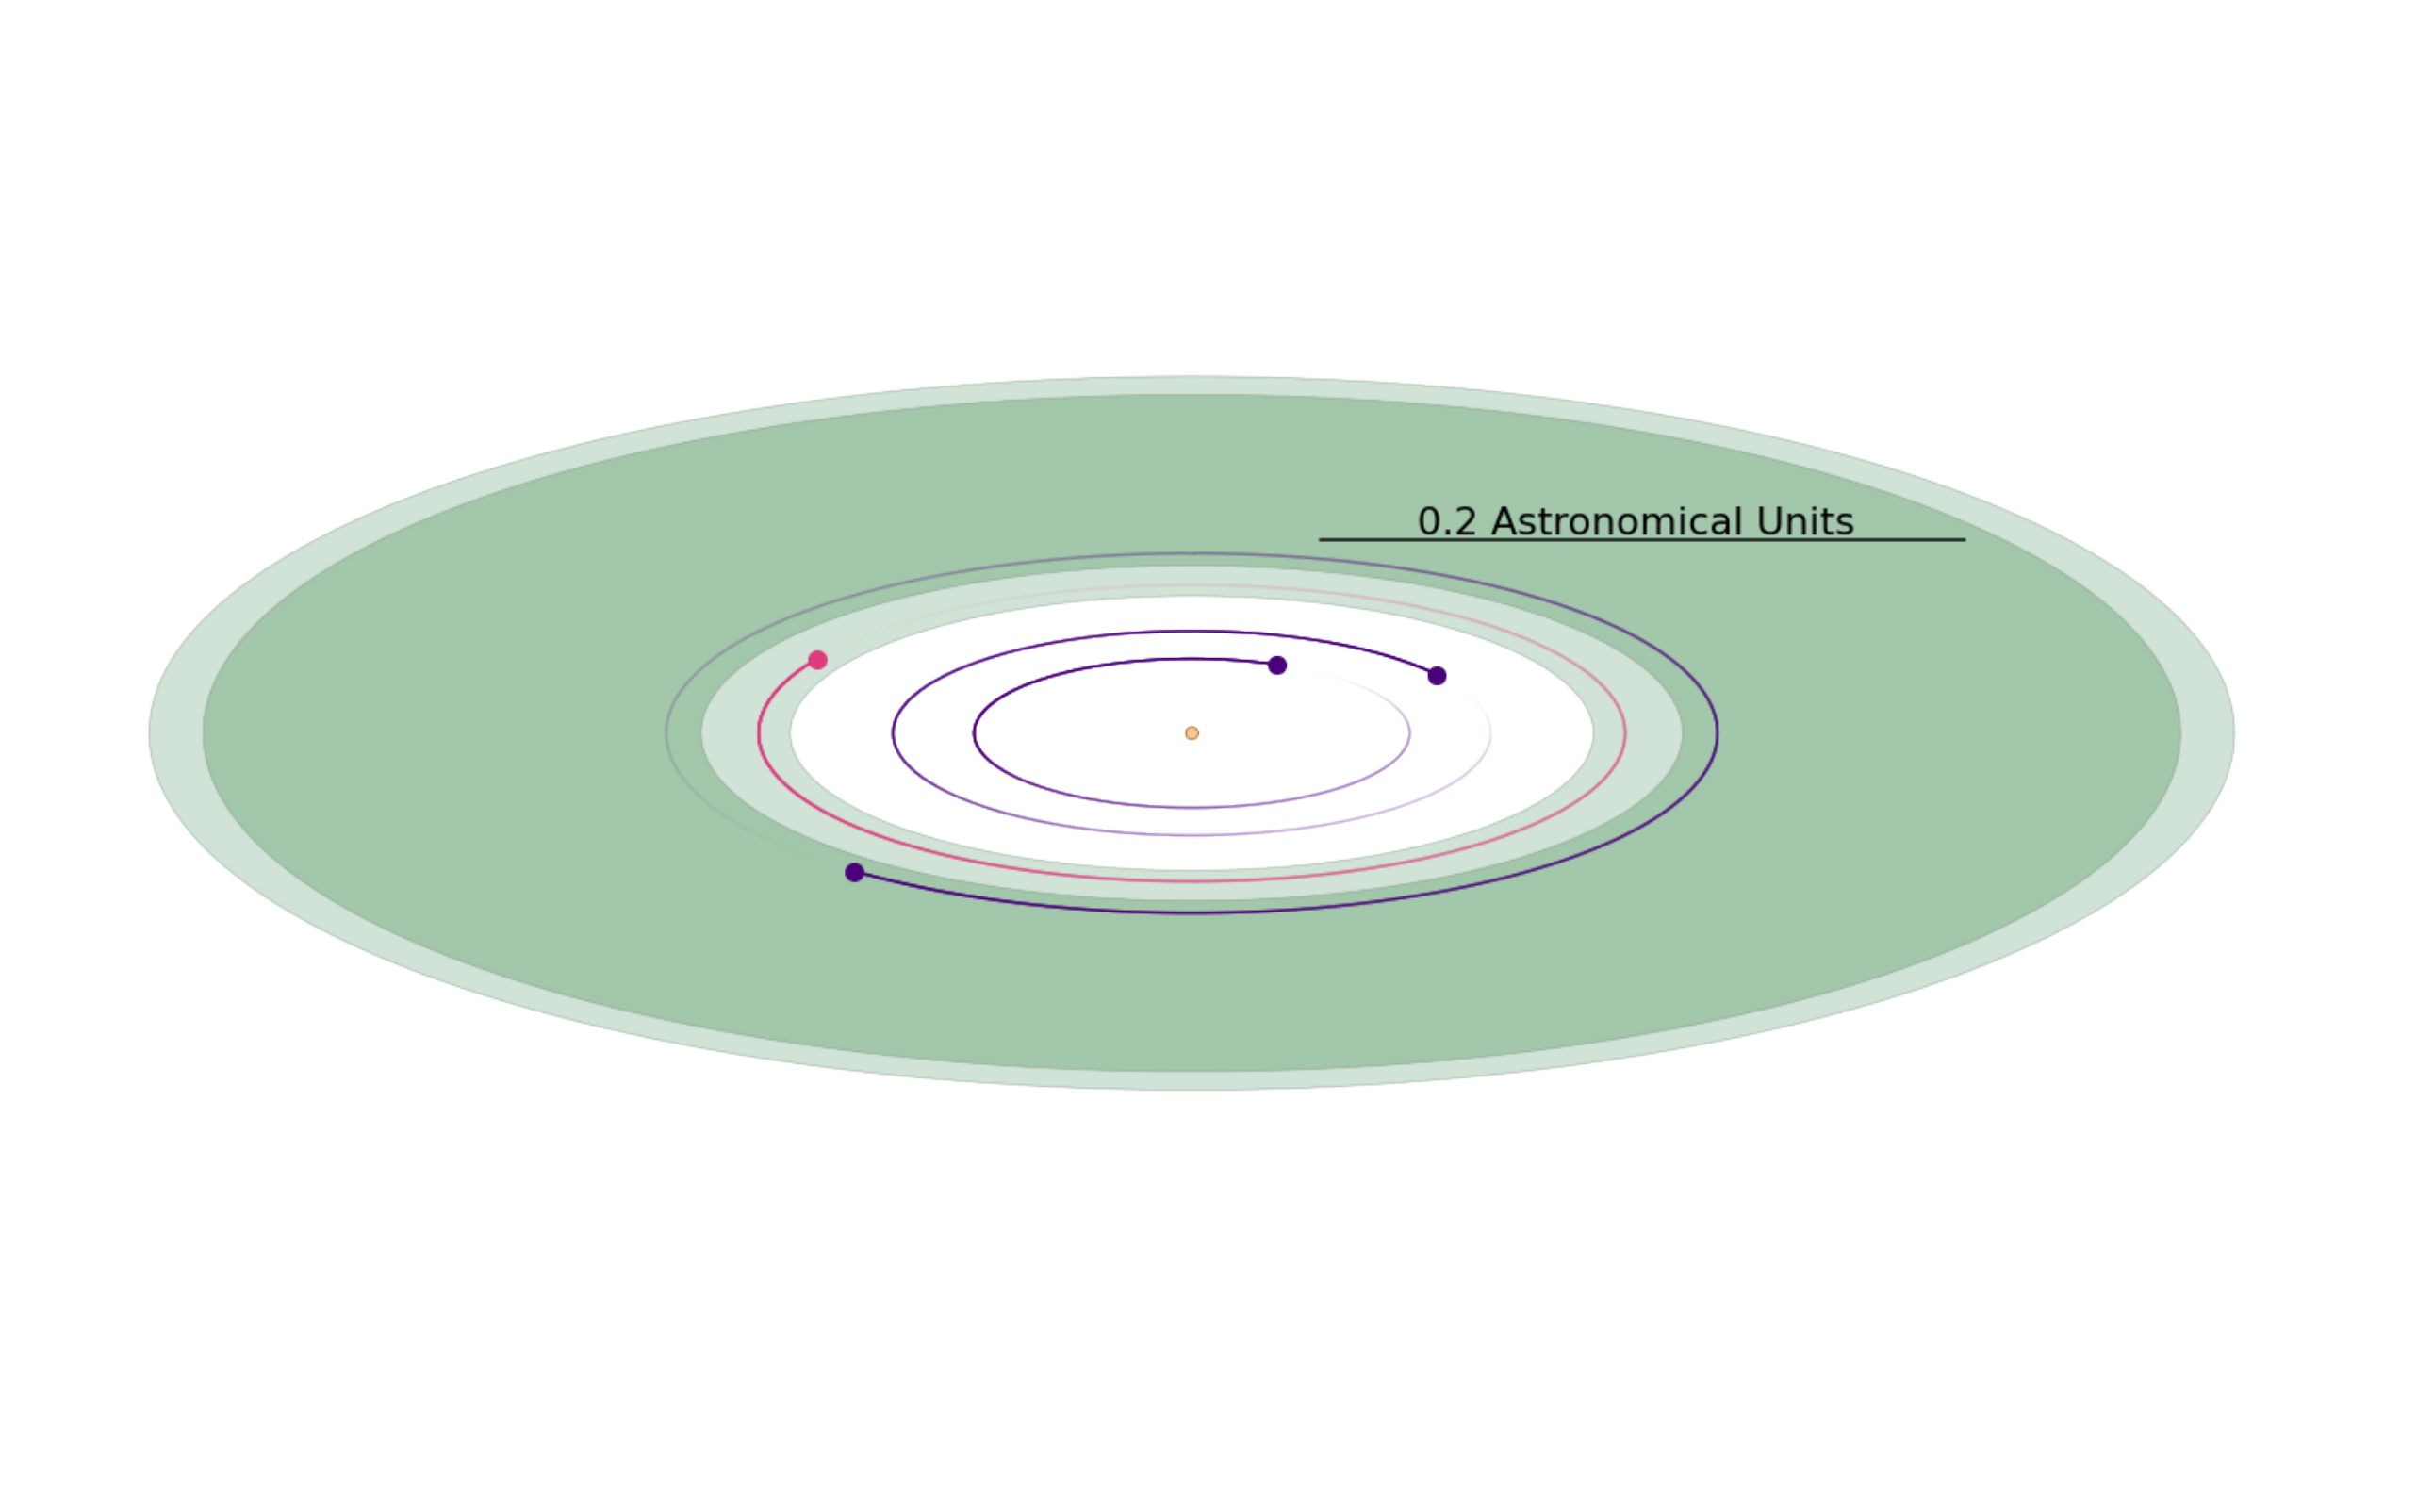 A Second Earth-Sized Planet in the Habitable Zone of the M Dwarf, TOI-700